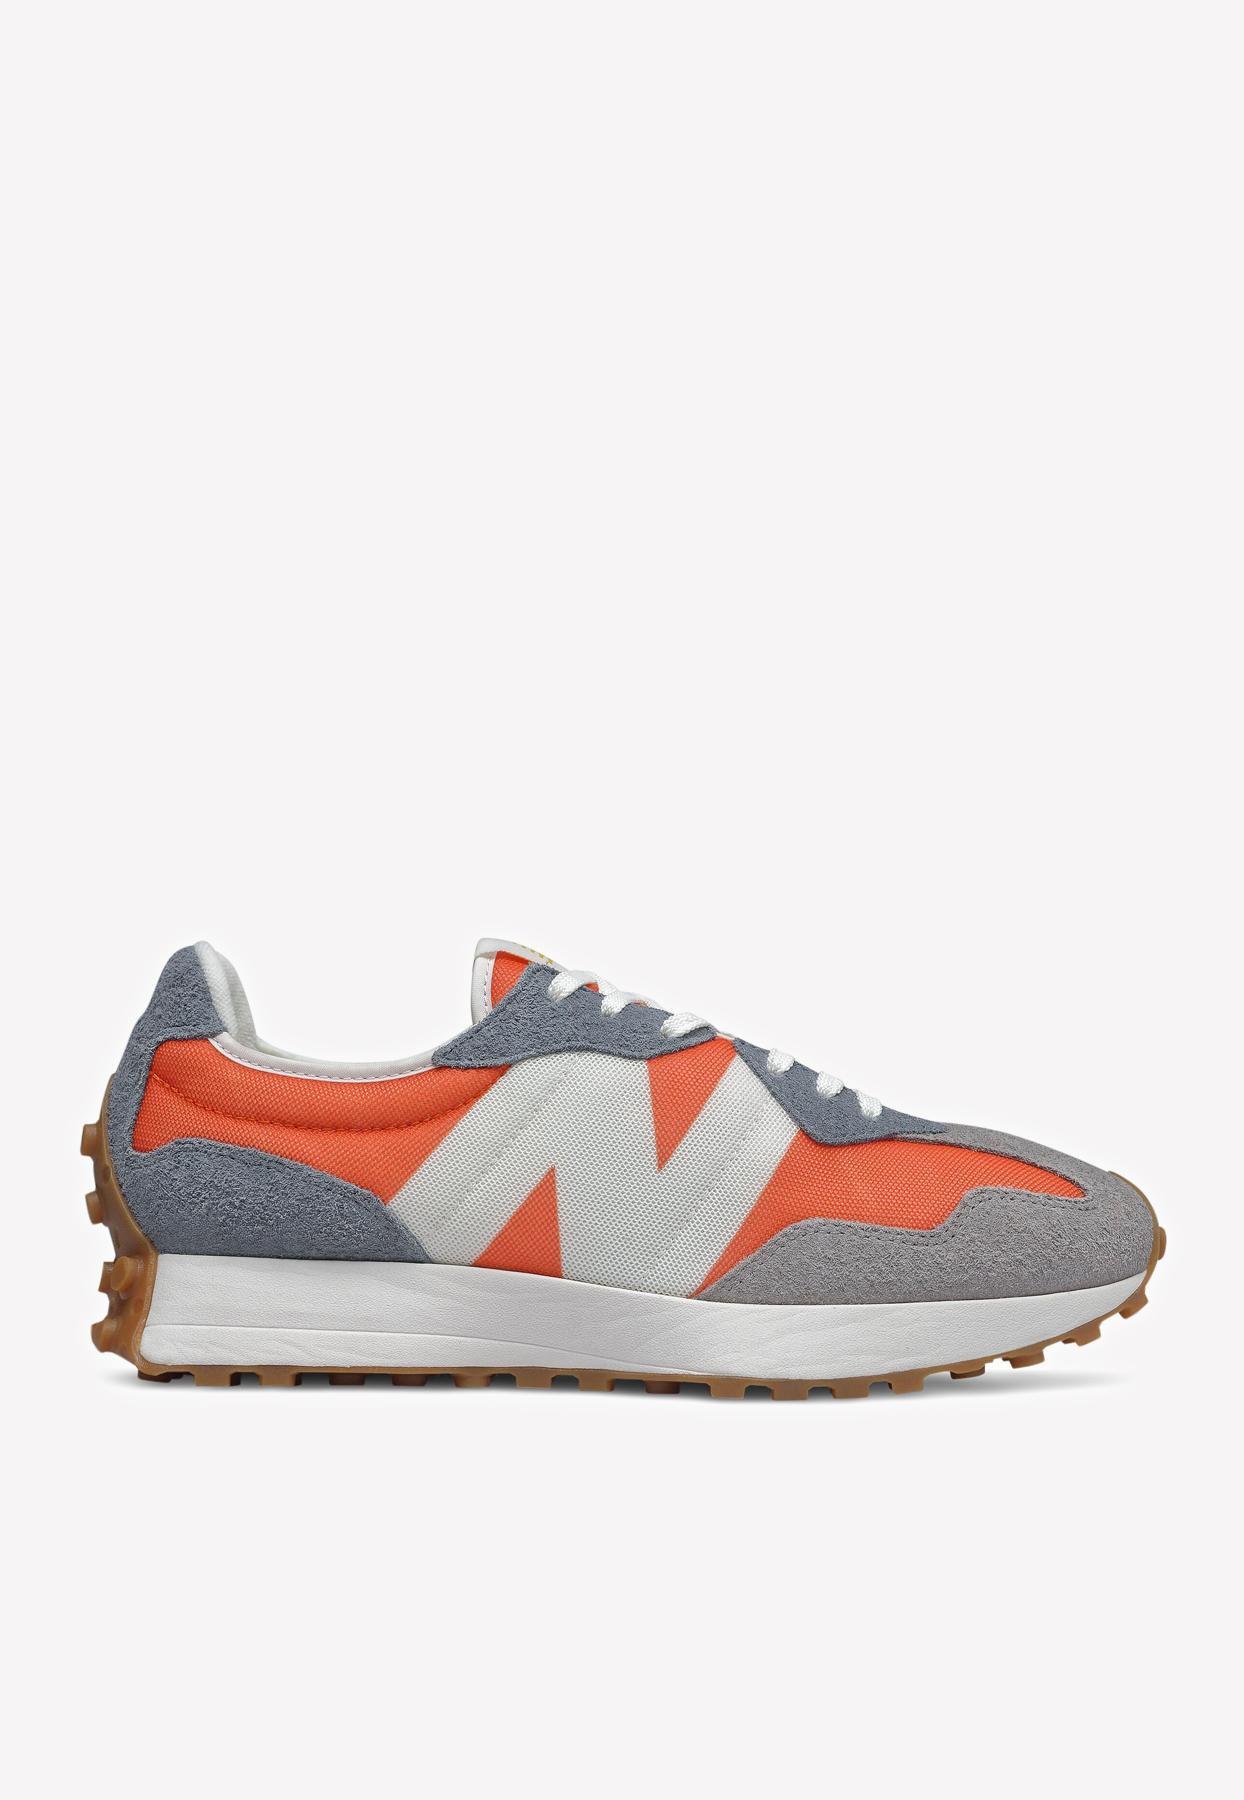 New Balance Suede 327 Retro Sneakers With Oversized 'n' Logo in Orange ...